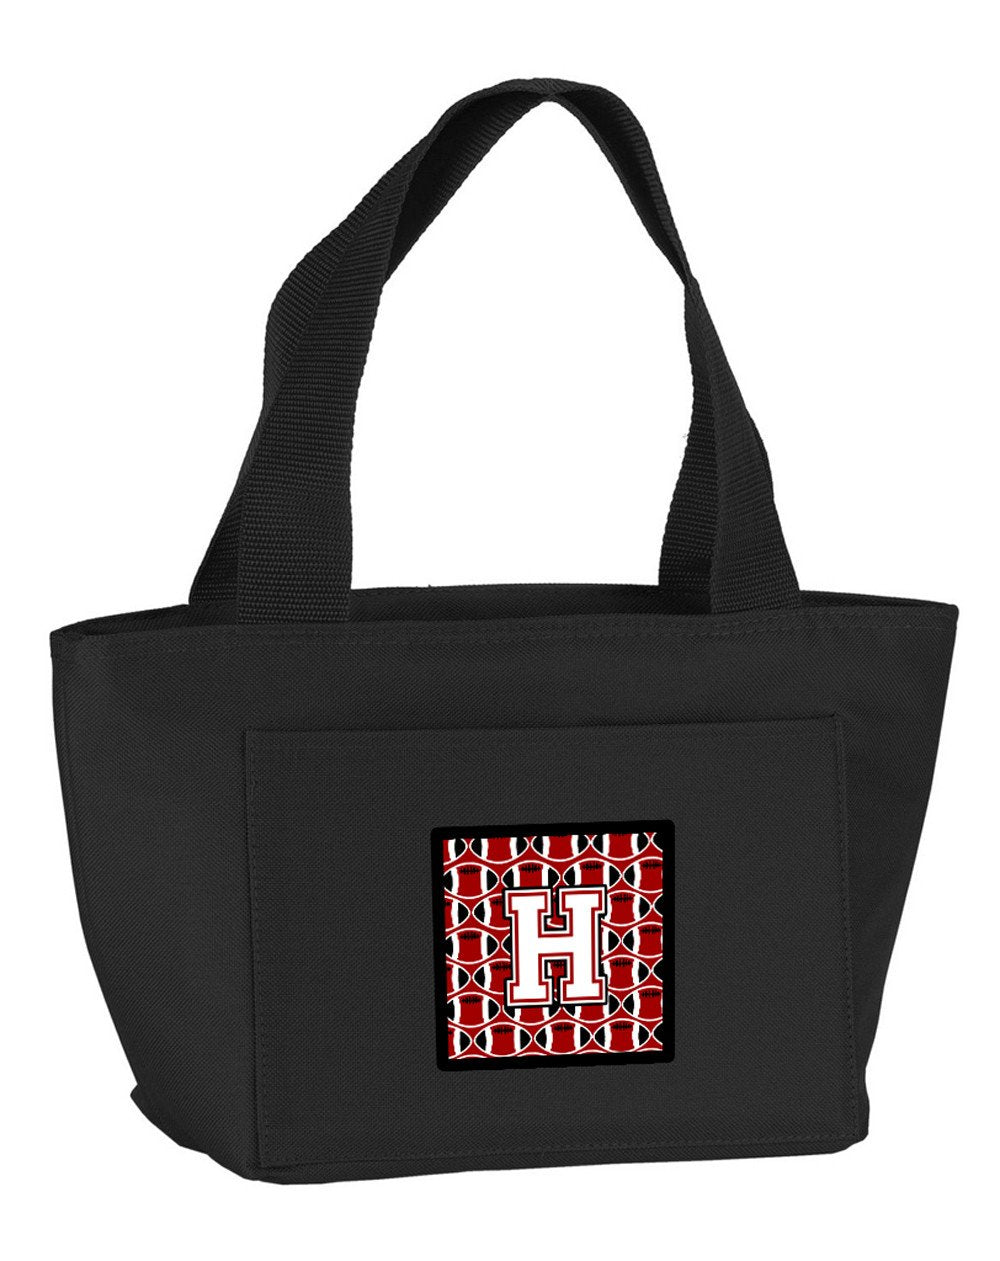 Letter H Football Cardinal and White Lunch Bag CJ1082-HBK-8808 by Caroline's Treasures